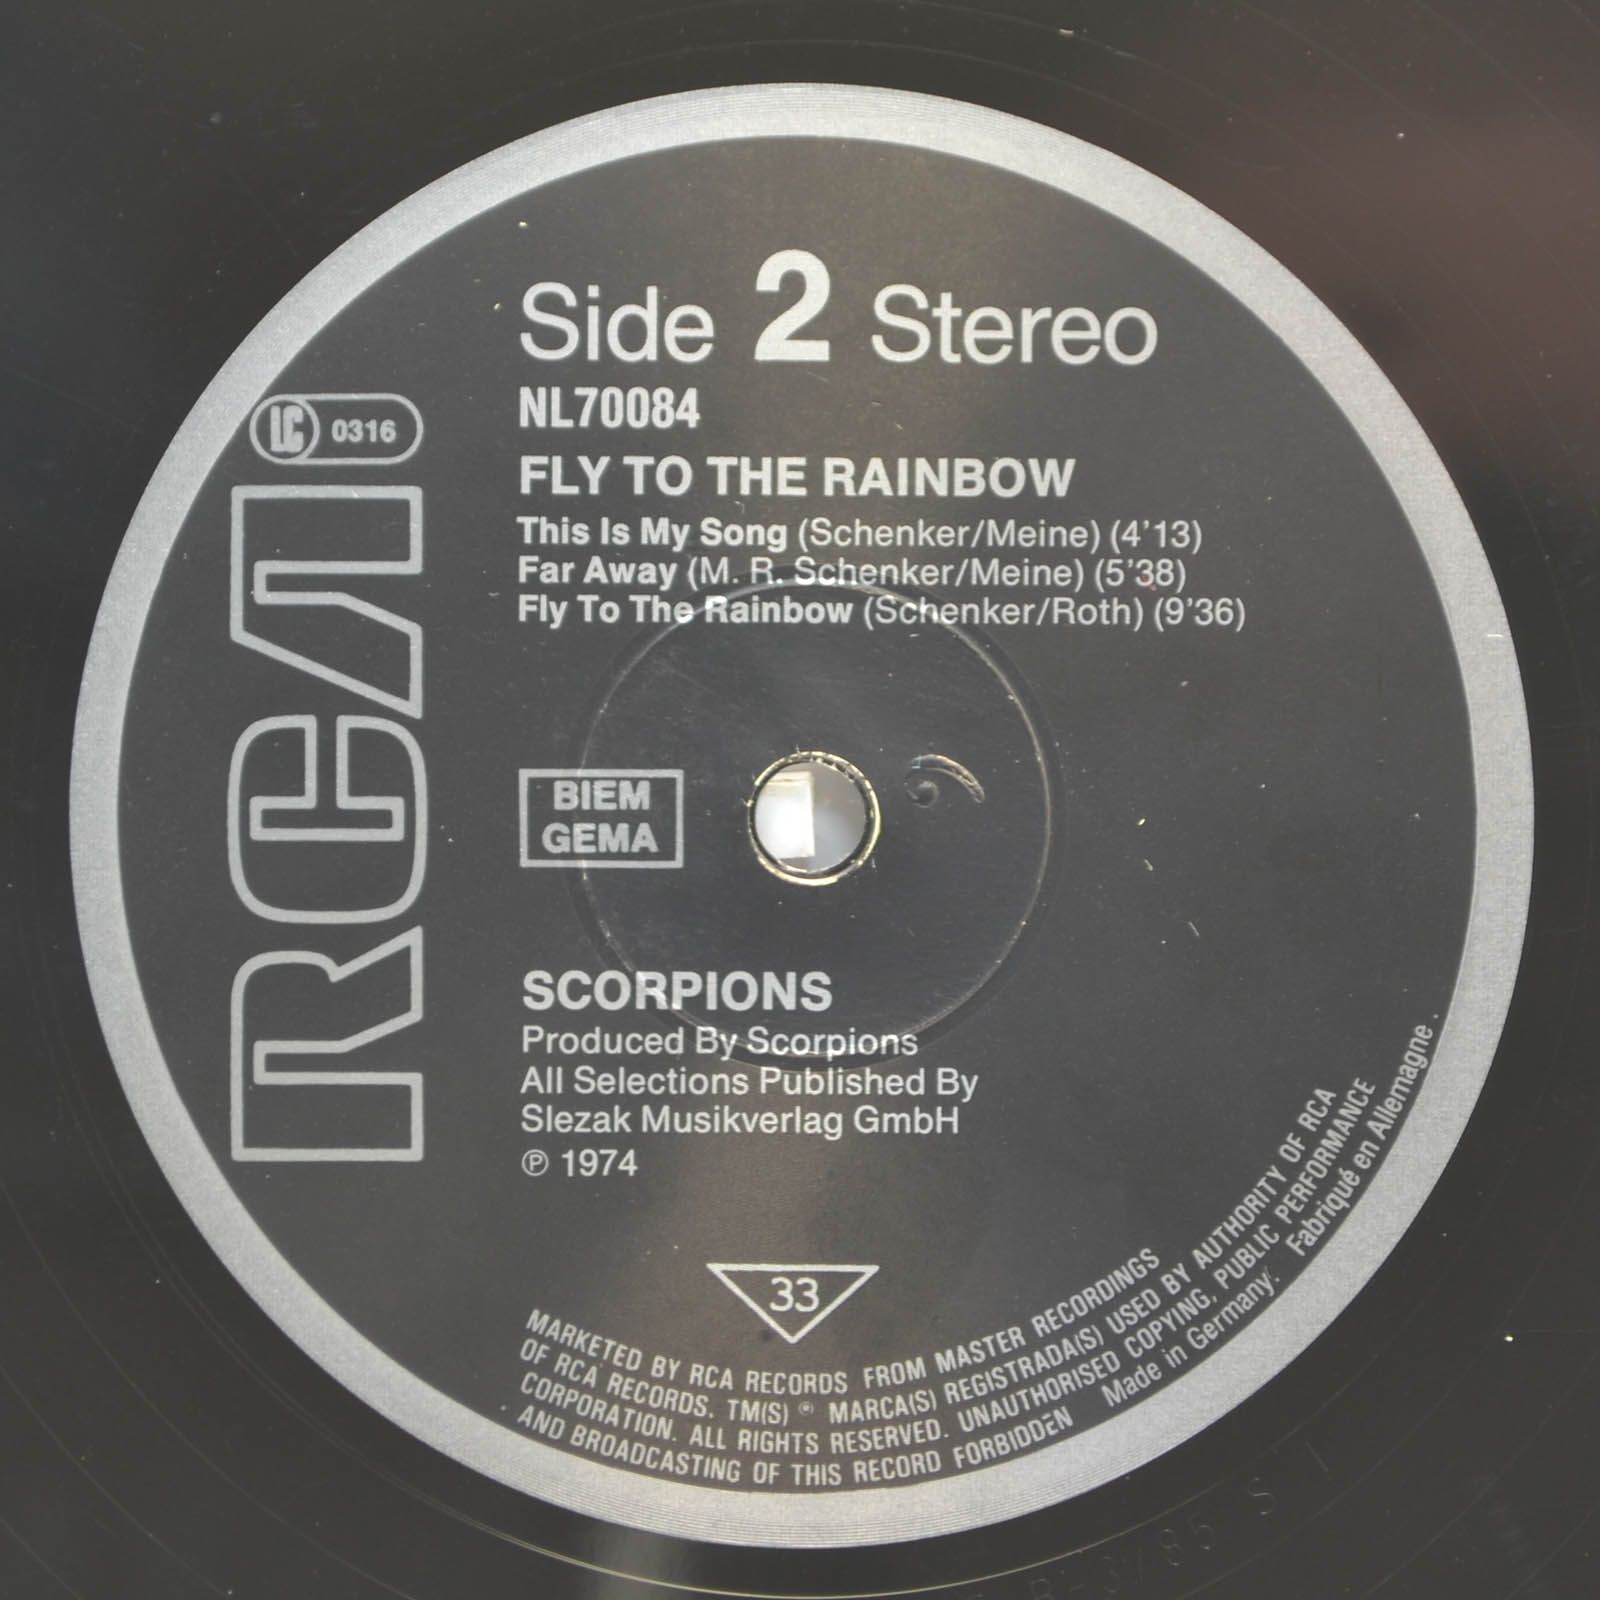 Scorpions — Fly To The Rainbow, 1974